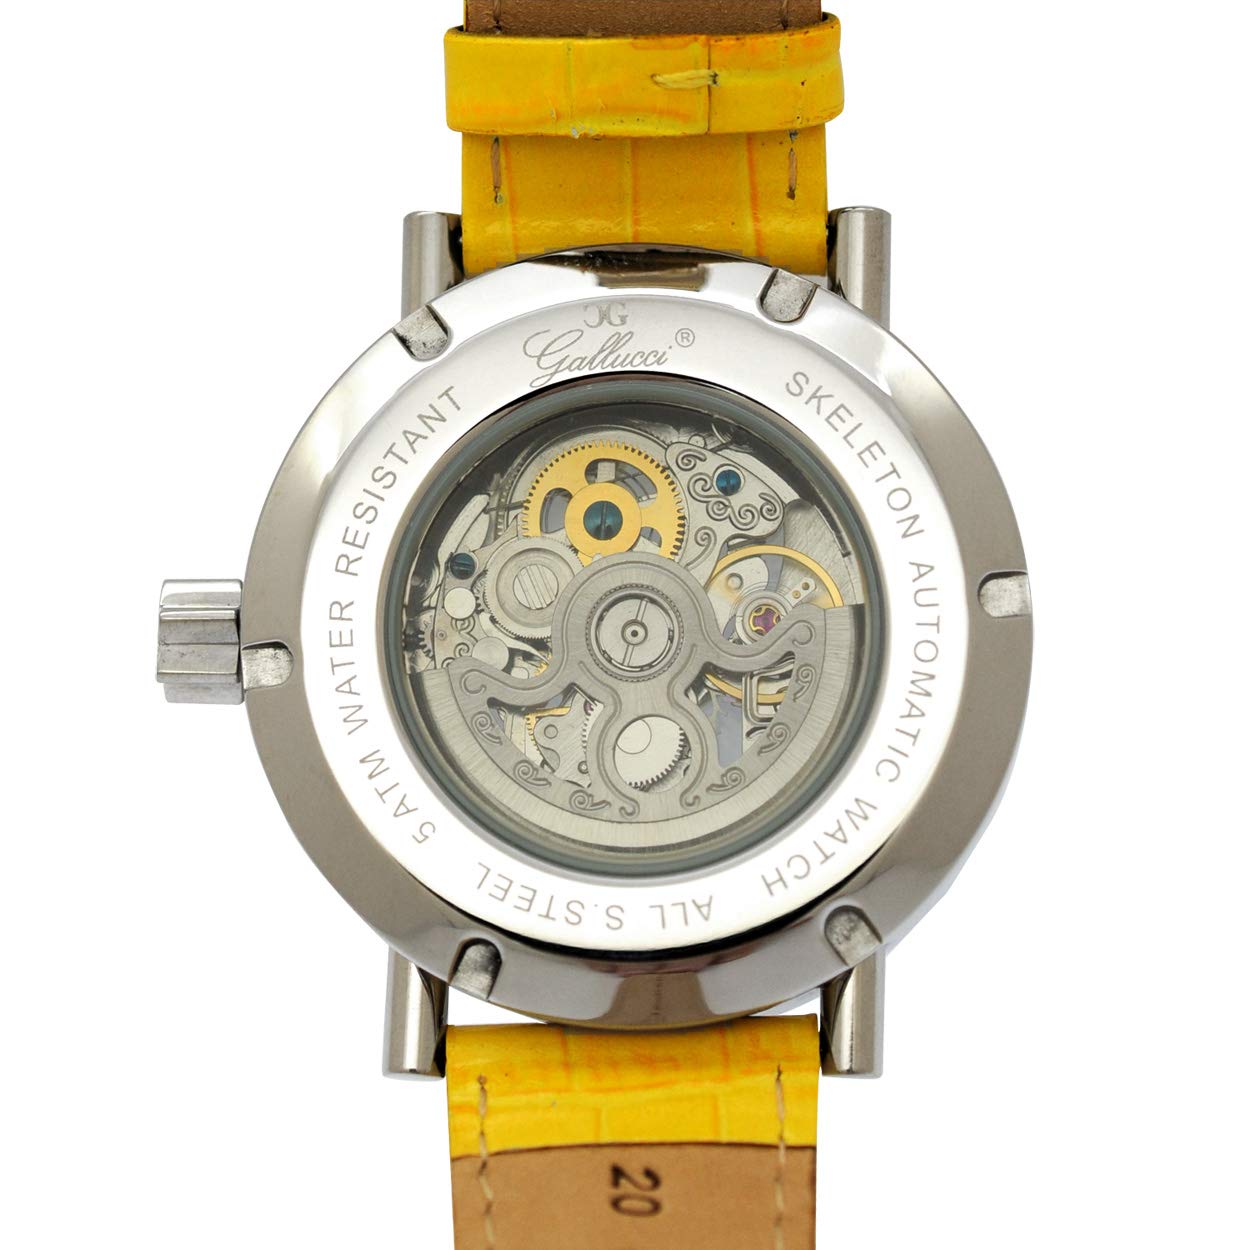 Gallucci Ladies Casual Skeleton Automatic Wrist Watch with a Flower Pattern Dial and Luminous Hands